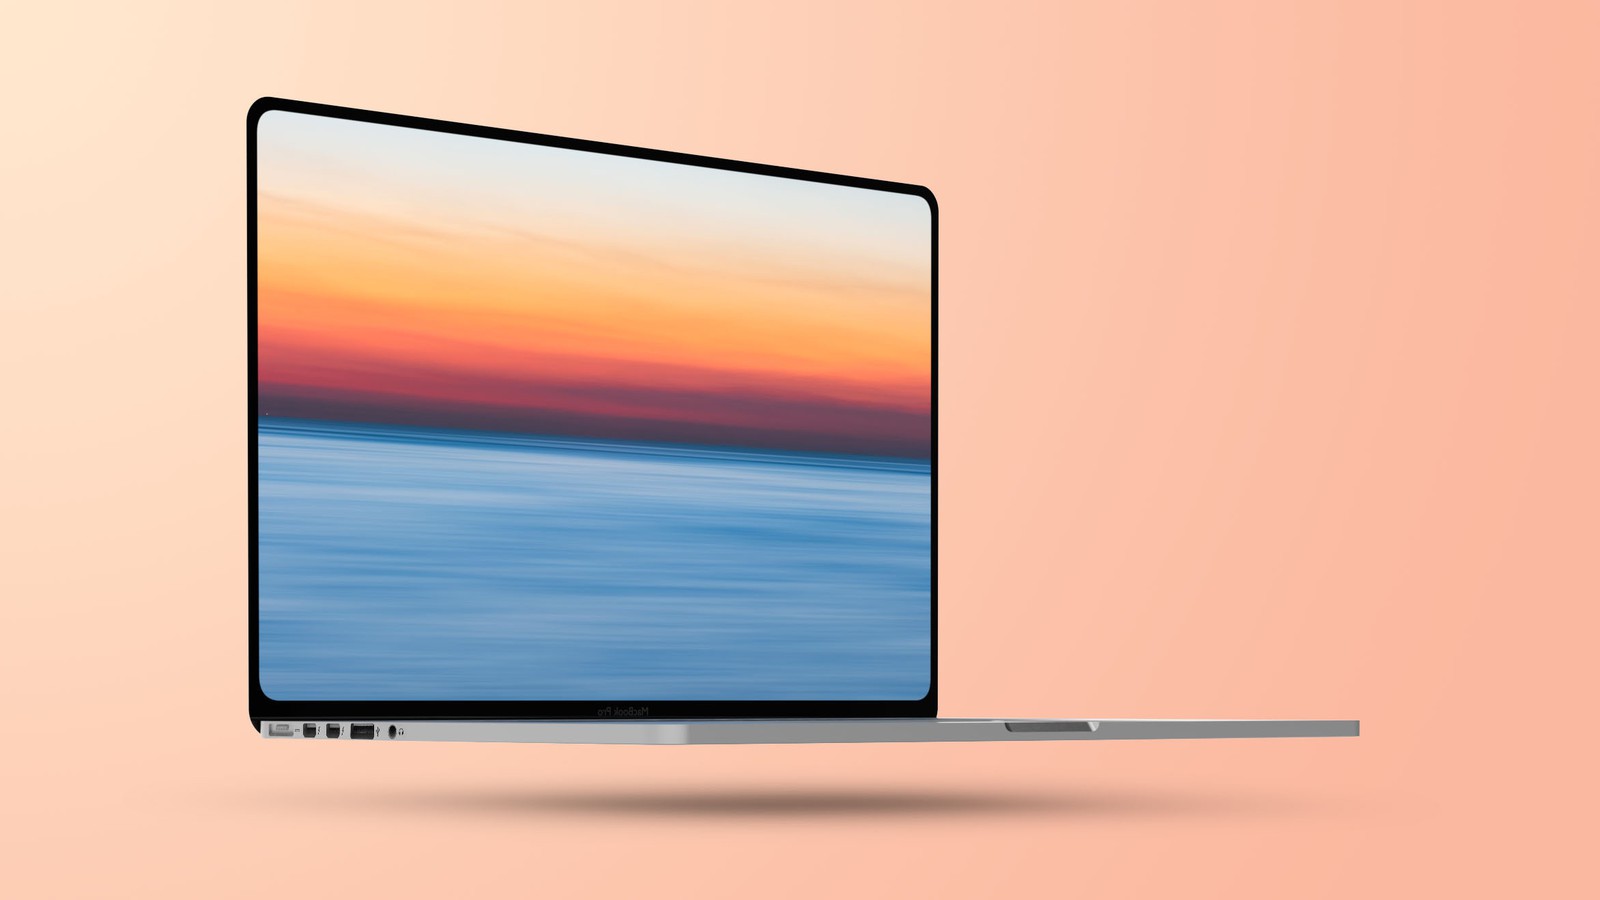 Apple S 21 Macbook Pro Refreshes Will Have A Flat Design Aping The Iphone 12 Series Notebookcheck Net News